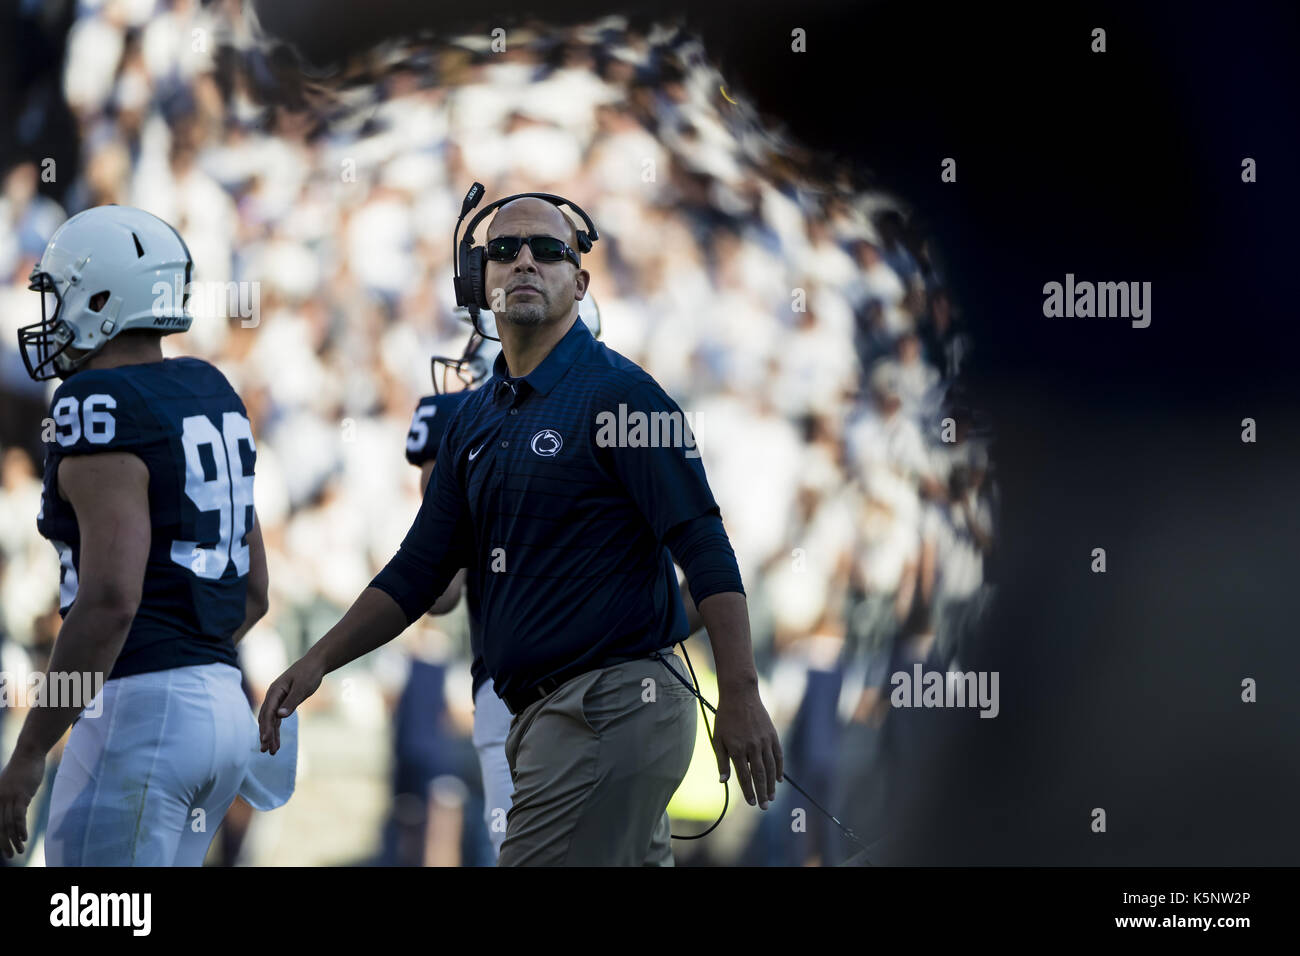 University Park, Pennsylvania, USA. 9th Sep, 2017. September 09, 2017: Penn State Nittany Lions head coach James Franklin looks on after his team scores a touchdown during the NCAA football game between the Pittsburgh Panthers and the Penn State Nittany Lions at Beaver Stadium in University Park, Pennsylvania. Credit: Scott Taetsch/ZUMA Wire/Alamy Live News Stock Photo